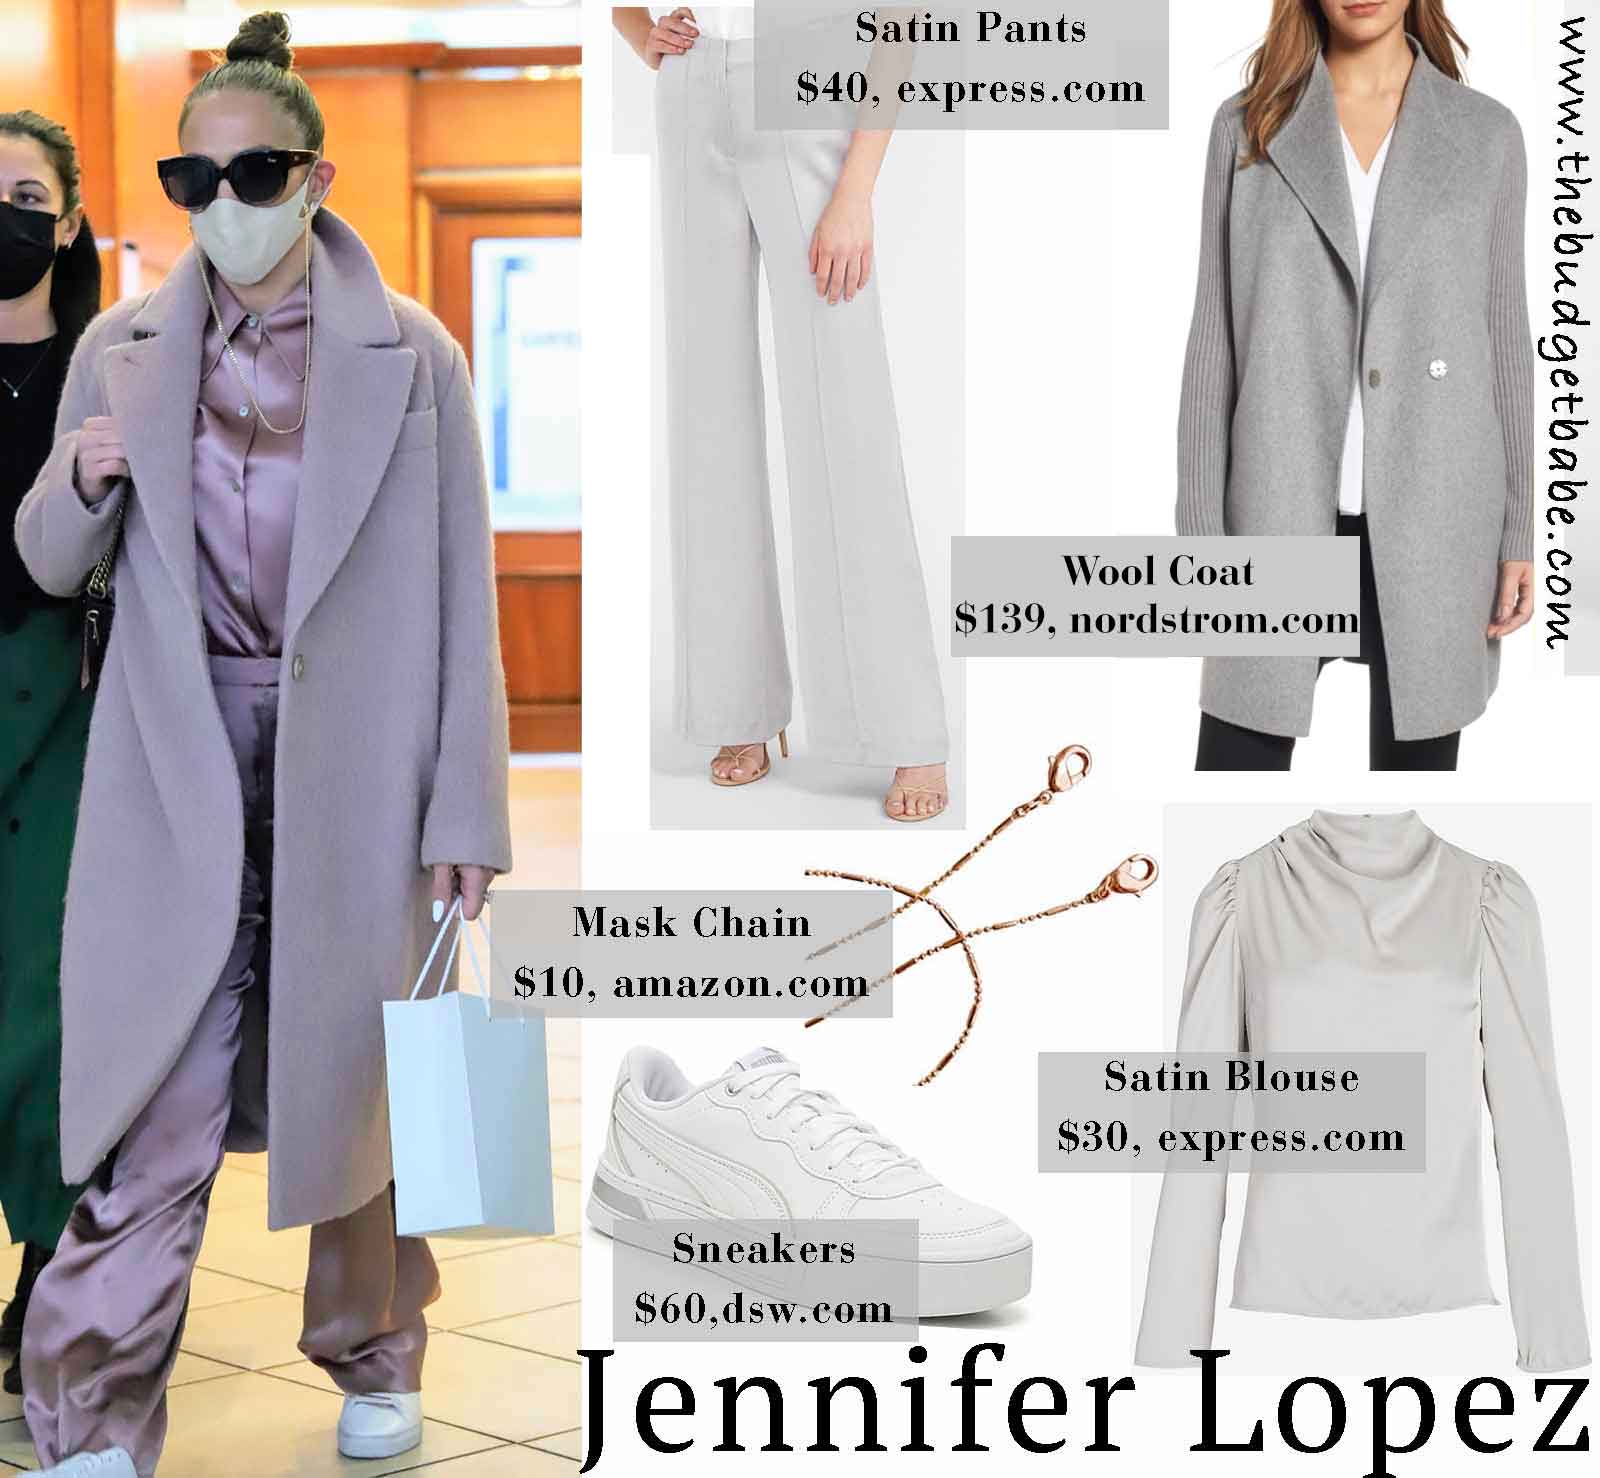 The Look for Less: Jennifer Lopez's Satin Blouse, Wide Leg Pants, and Overcoat